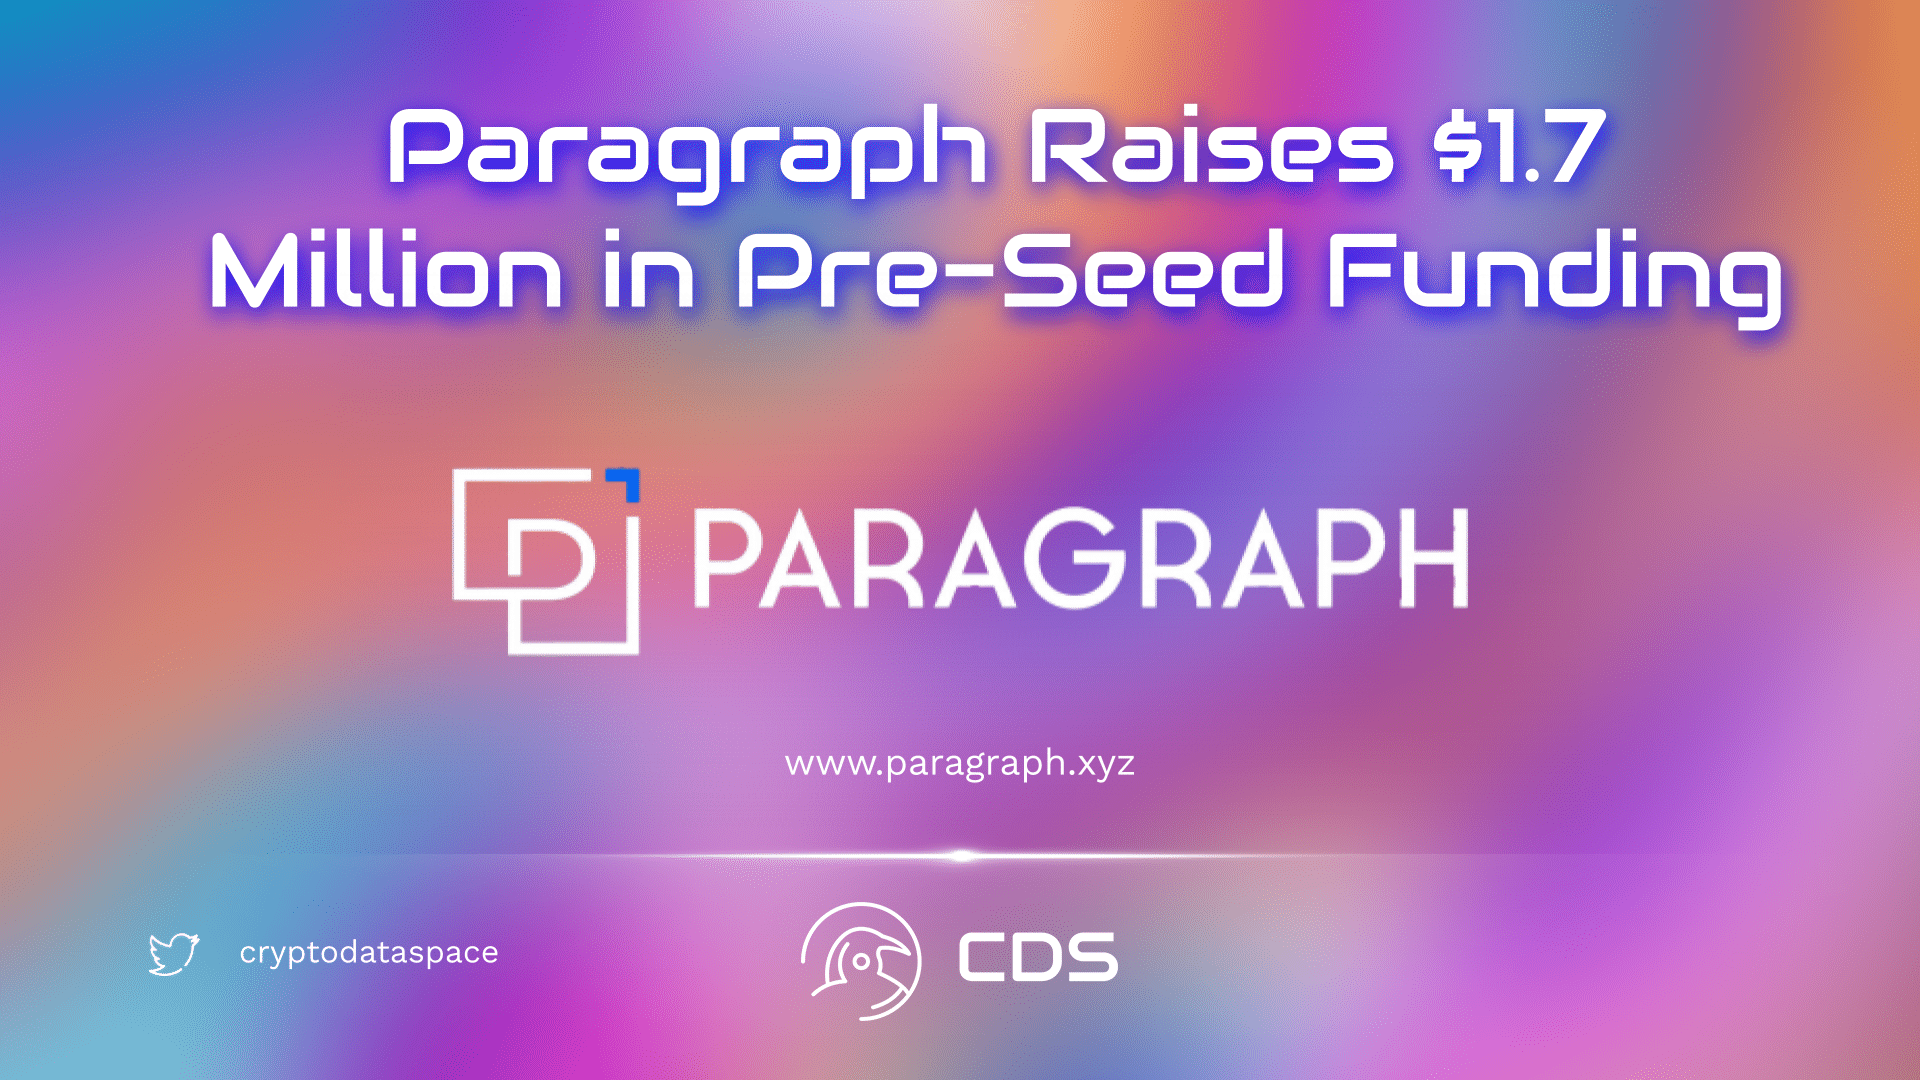 Paragraph Raises $1.7 Million in Pre-Seed Funding